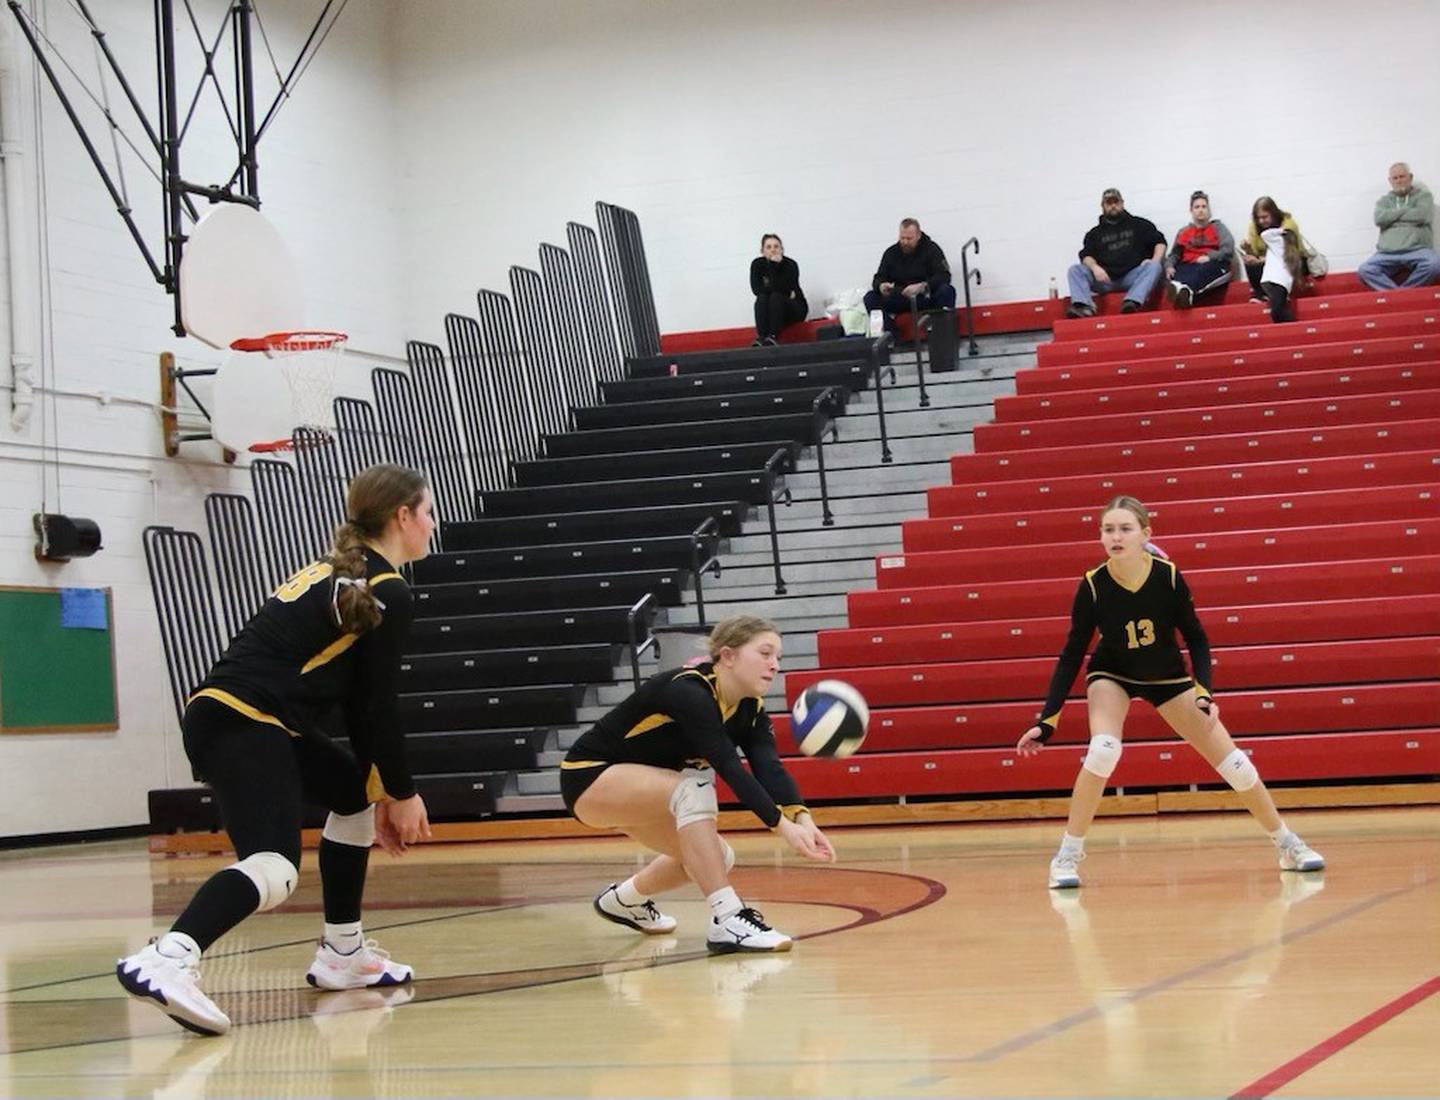 Eden Carlson digs up a serve for the PCJH 8th grade Pumas in Saturday's Marseilles Tournament.